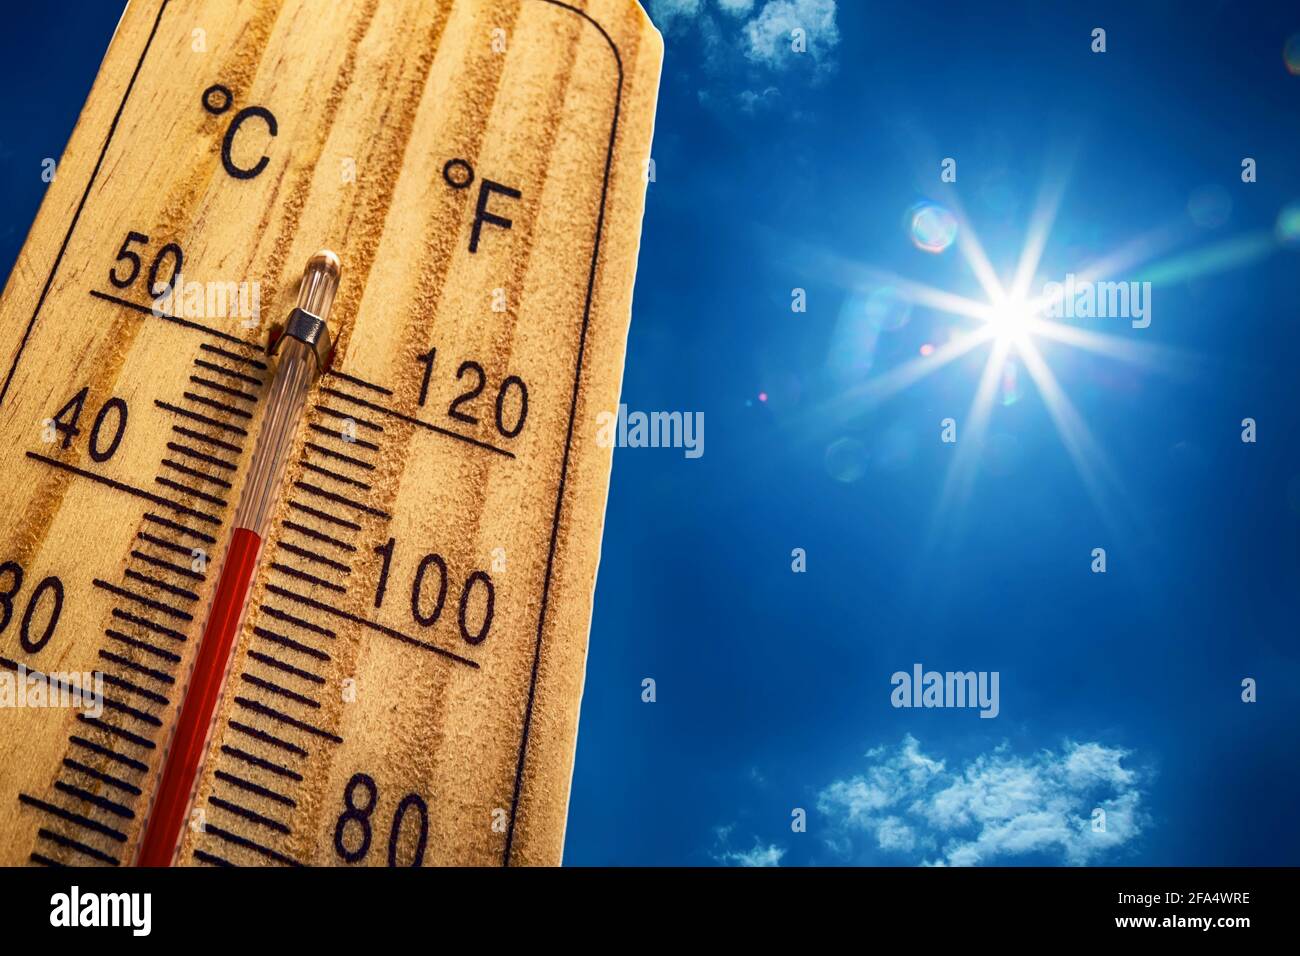 Thermometer Sun Sky 40 Degres. Hot summer day. High Summer temperatures in degrees Celsius and Farenheit. Stock Photo